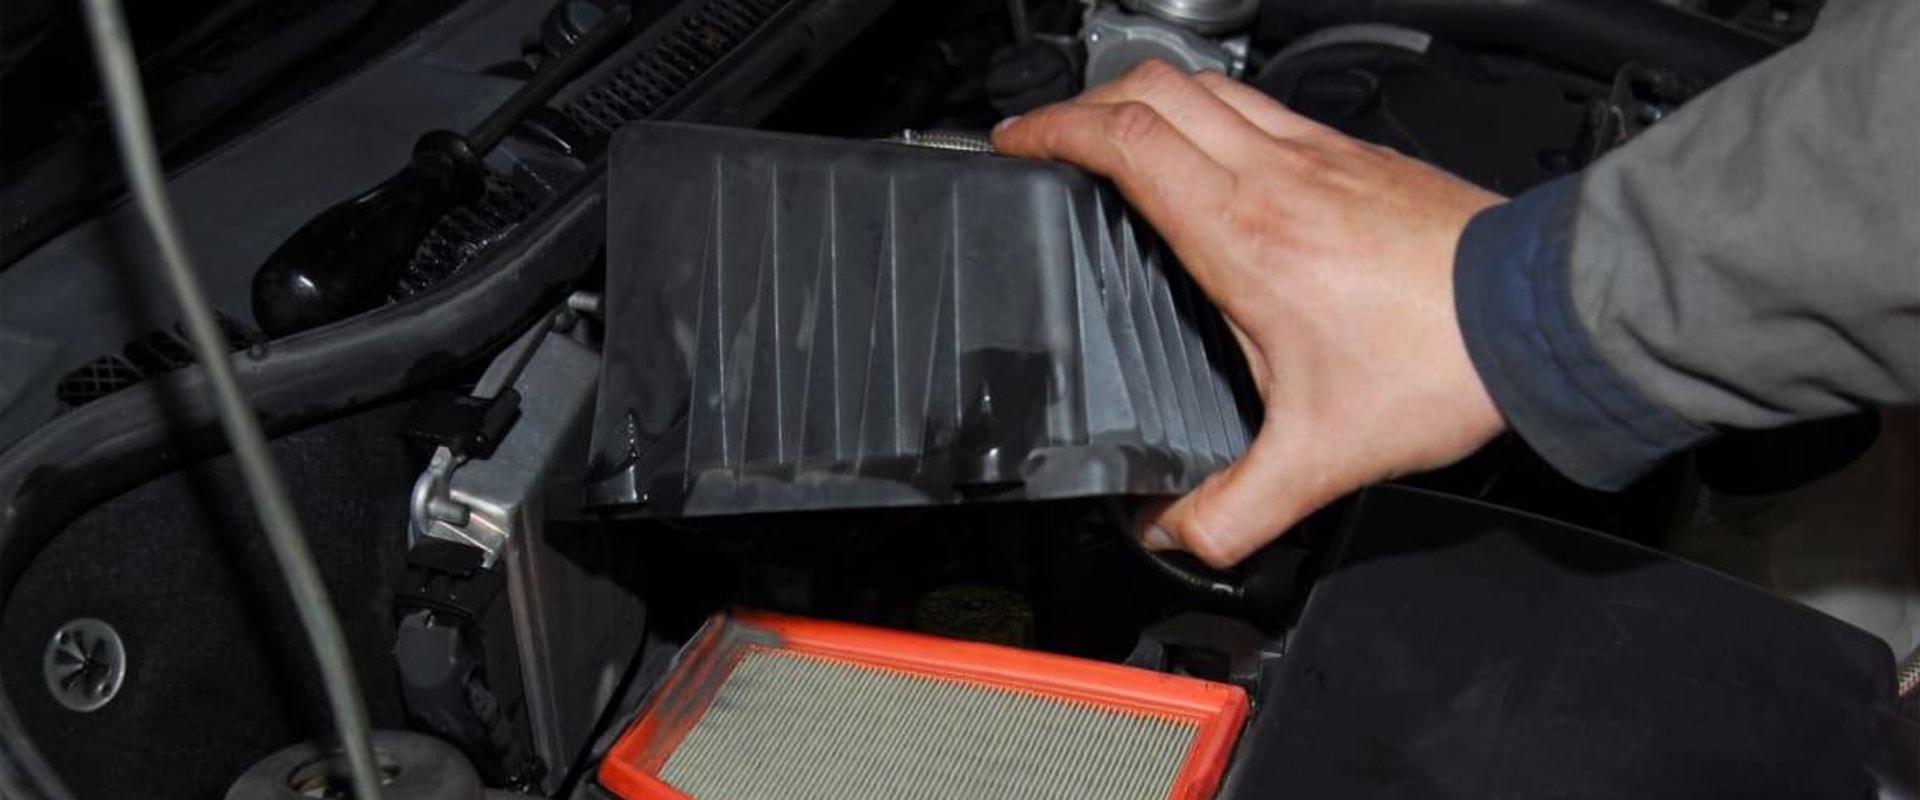 Are Reusable Car Air Filters Worth It?